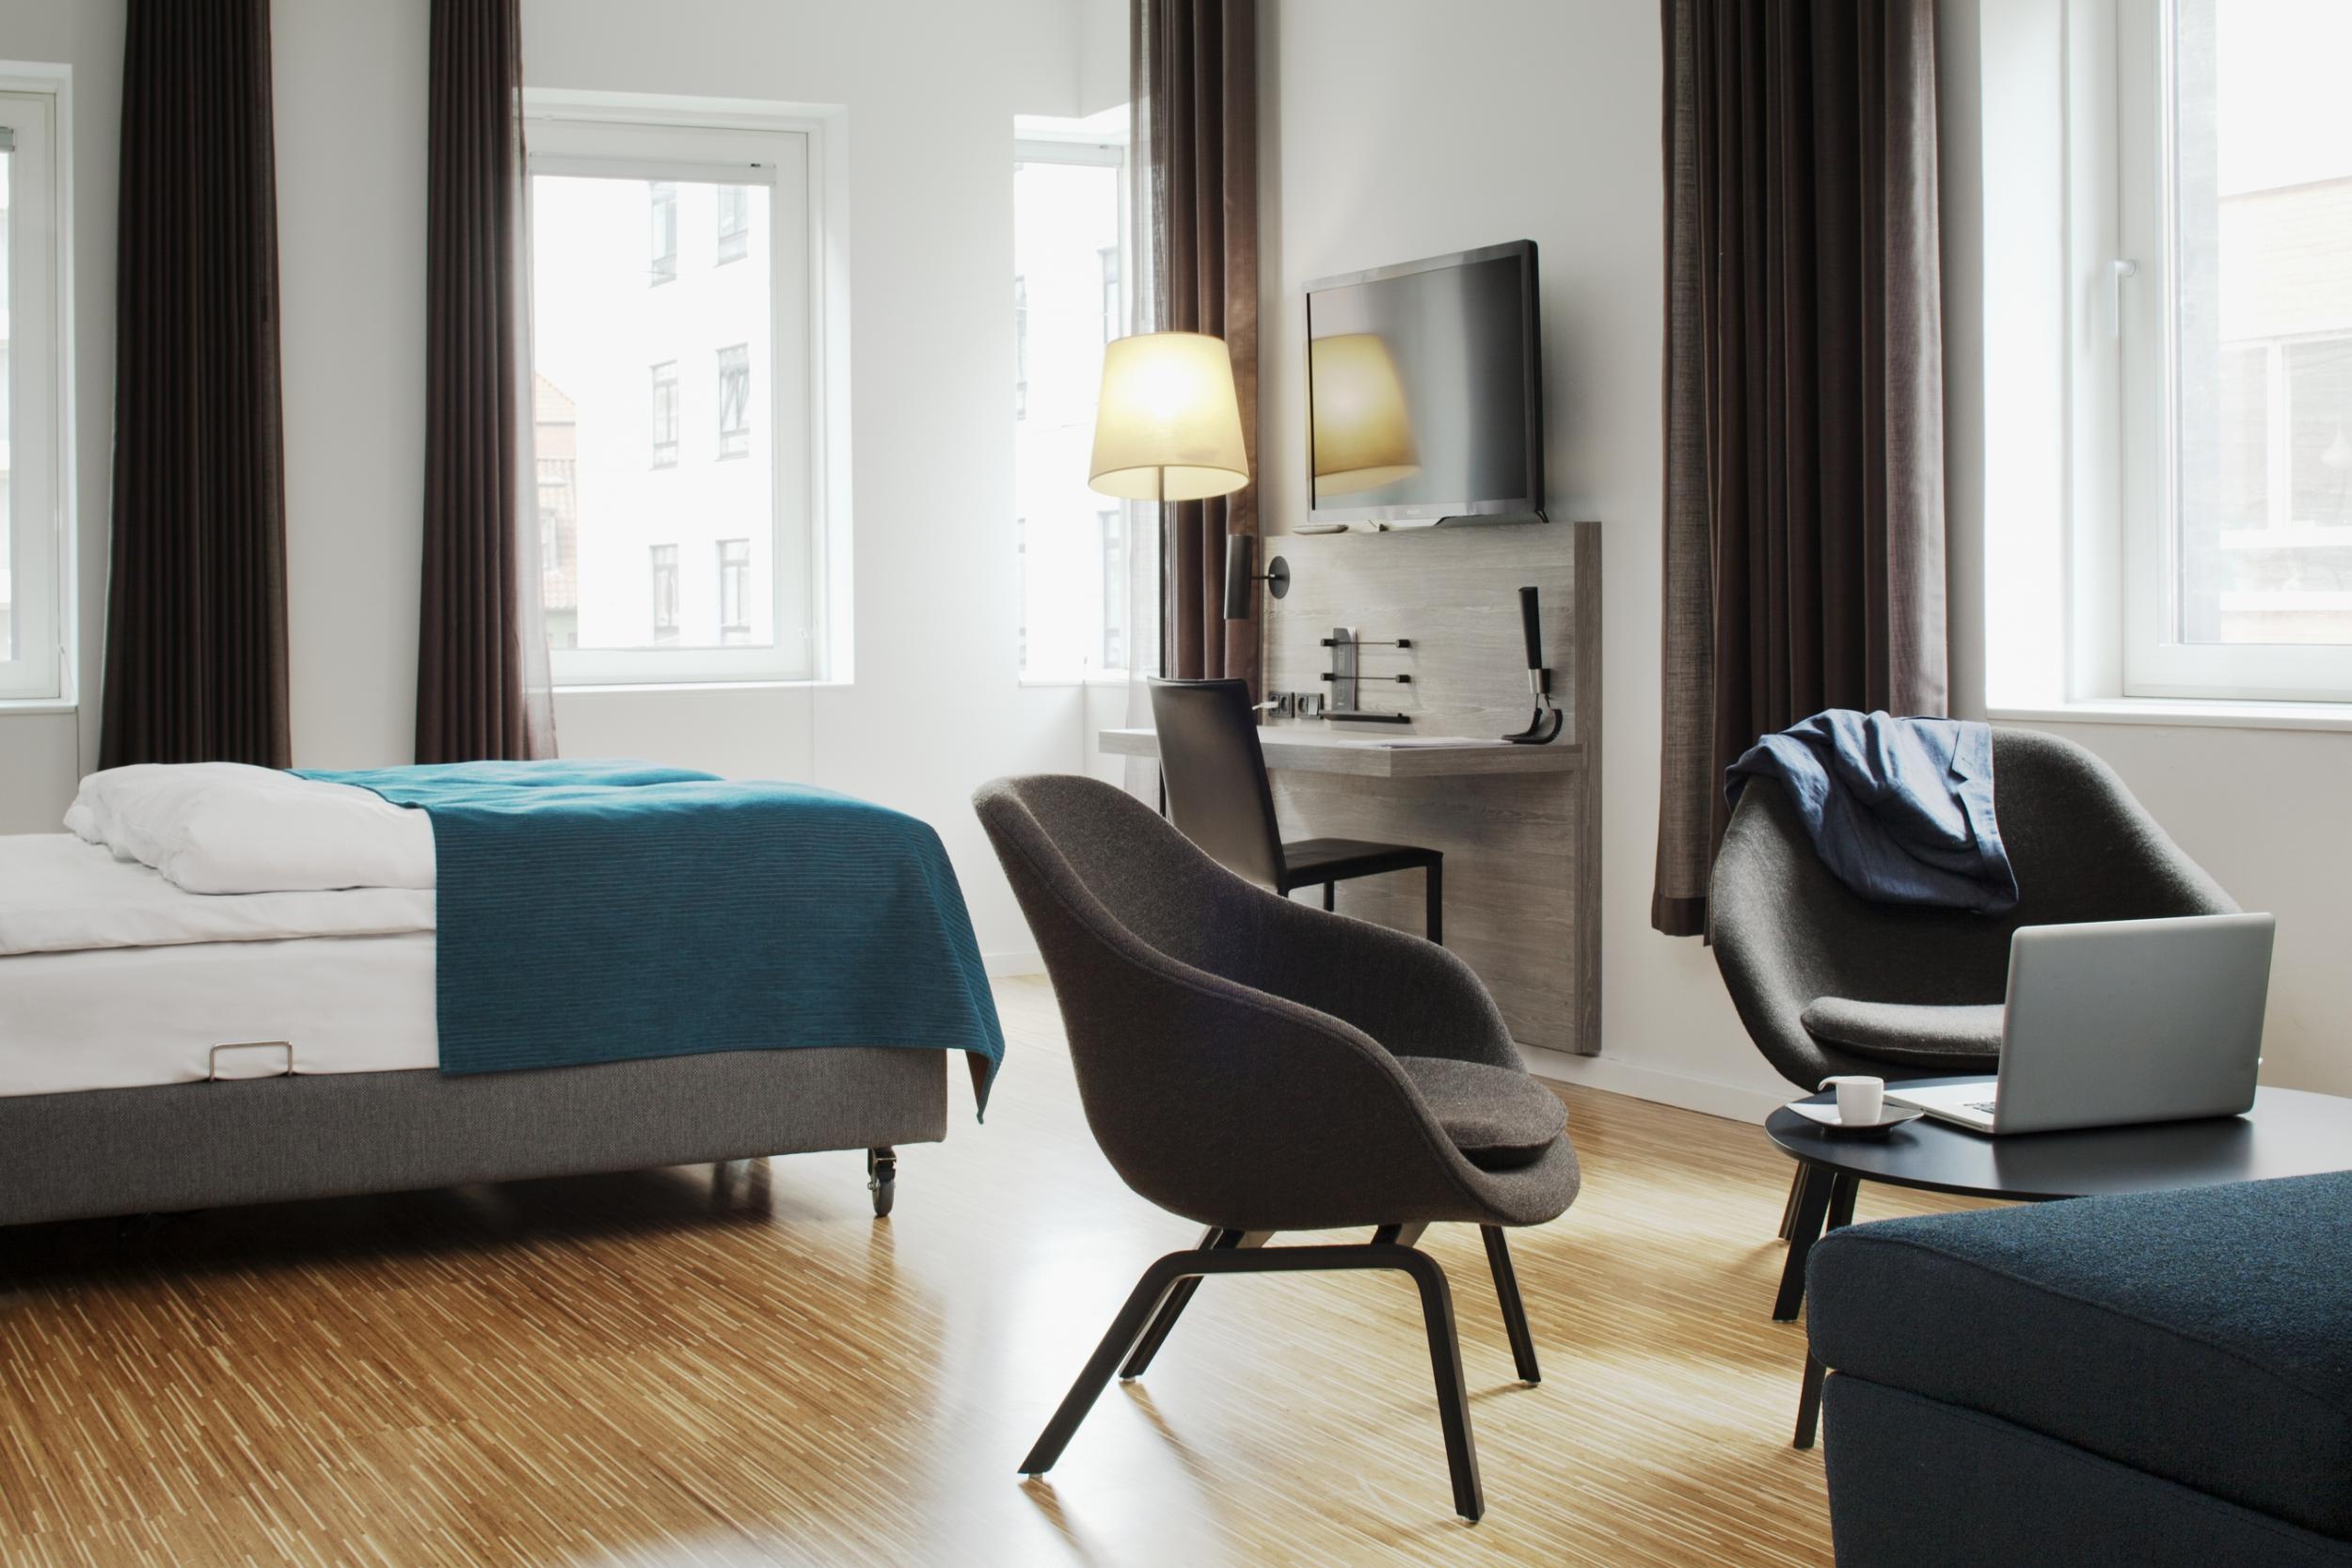 The stylish Scandic Aarhus City is the perfect springboard for accessing the rest of the city